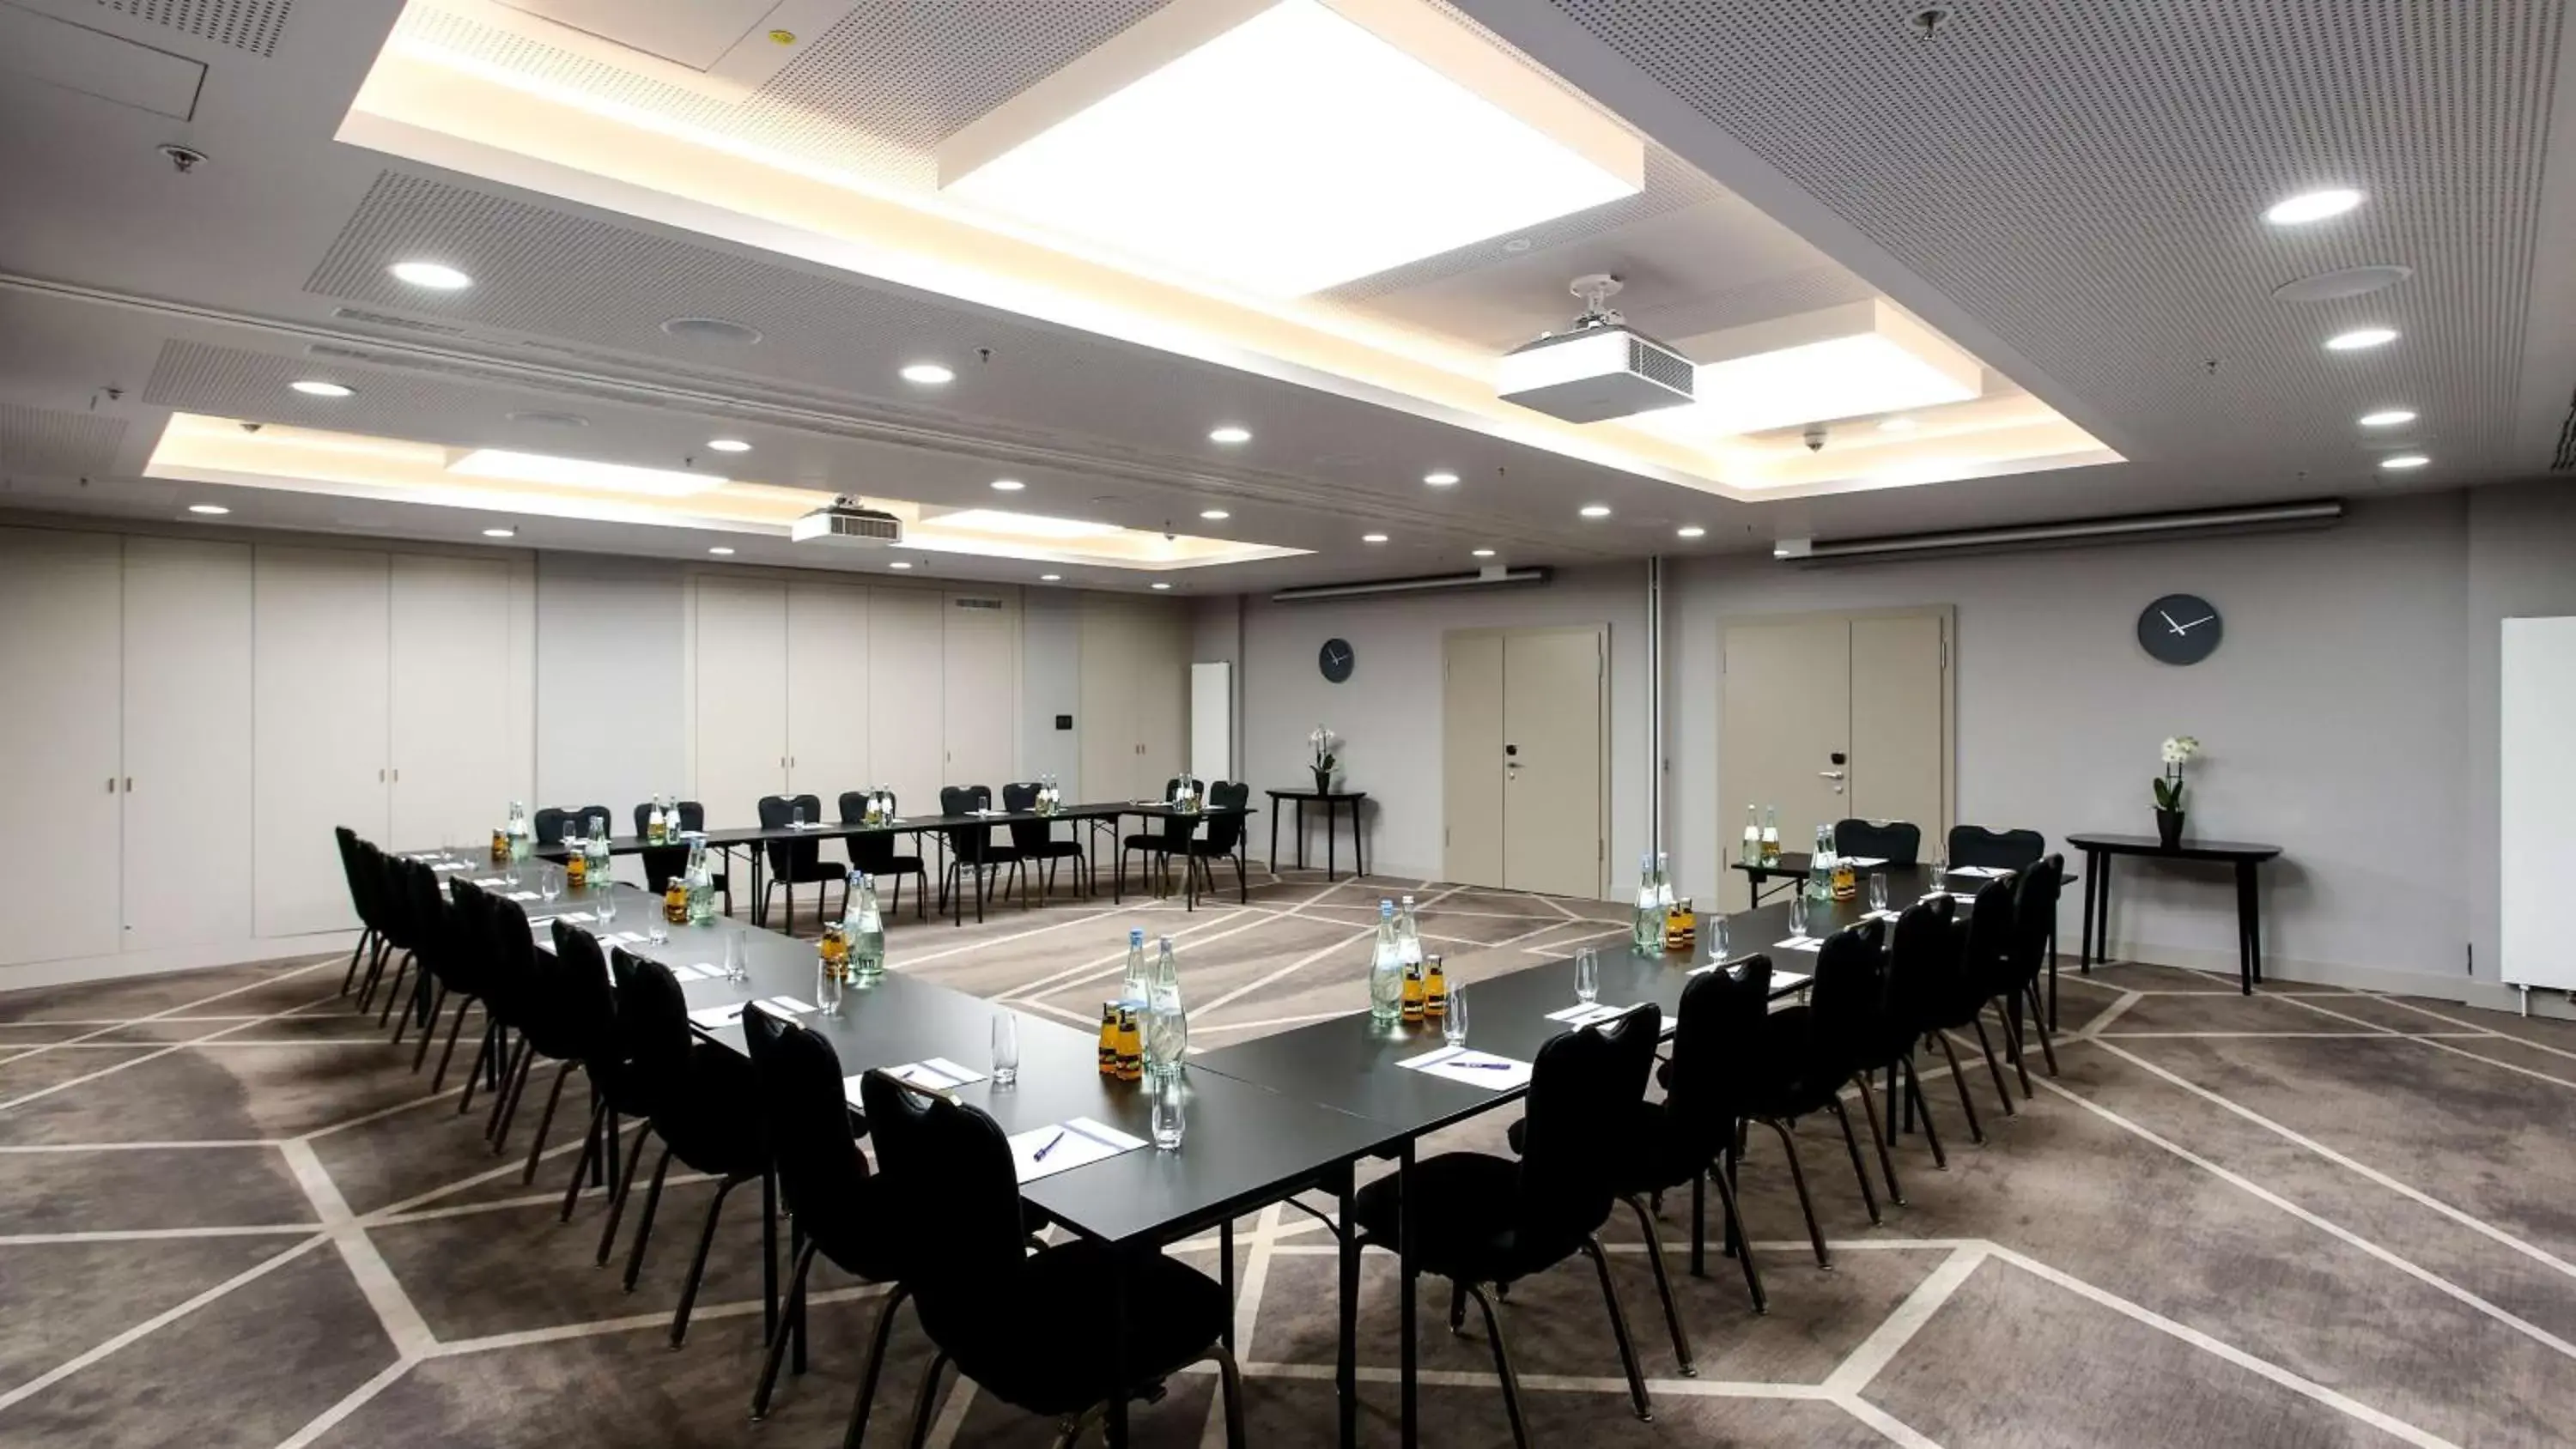 Meeting/conference room in Park Plaza Nuremberg